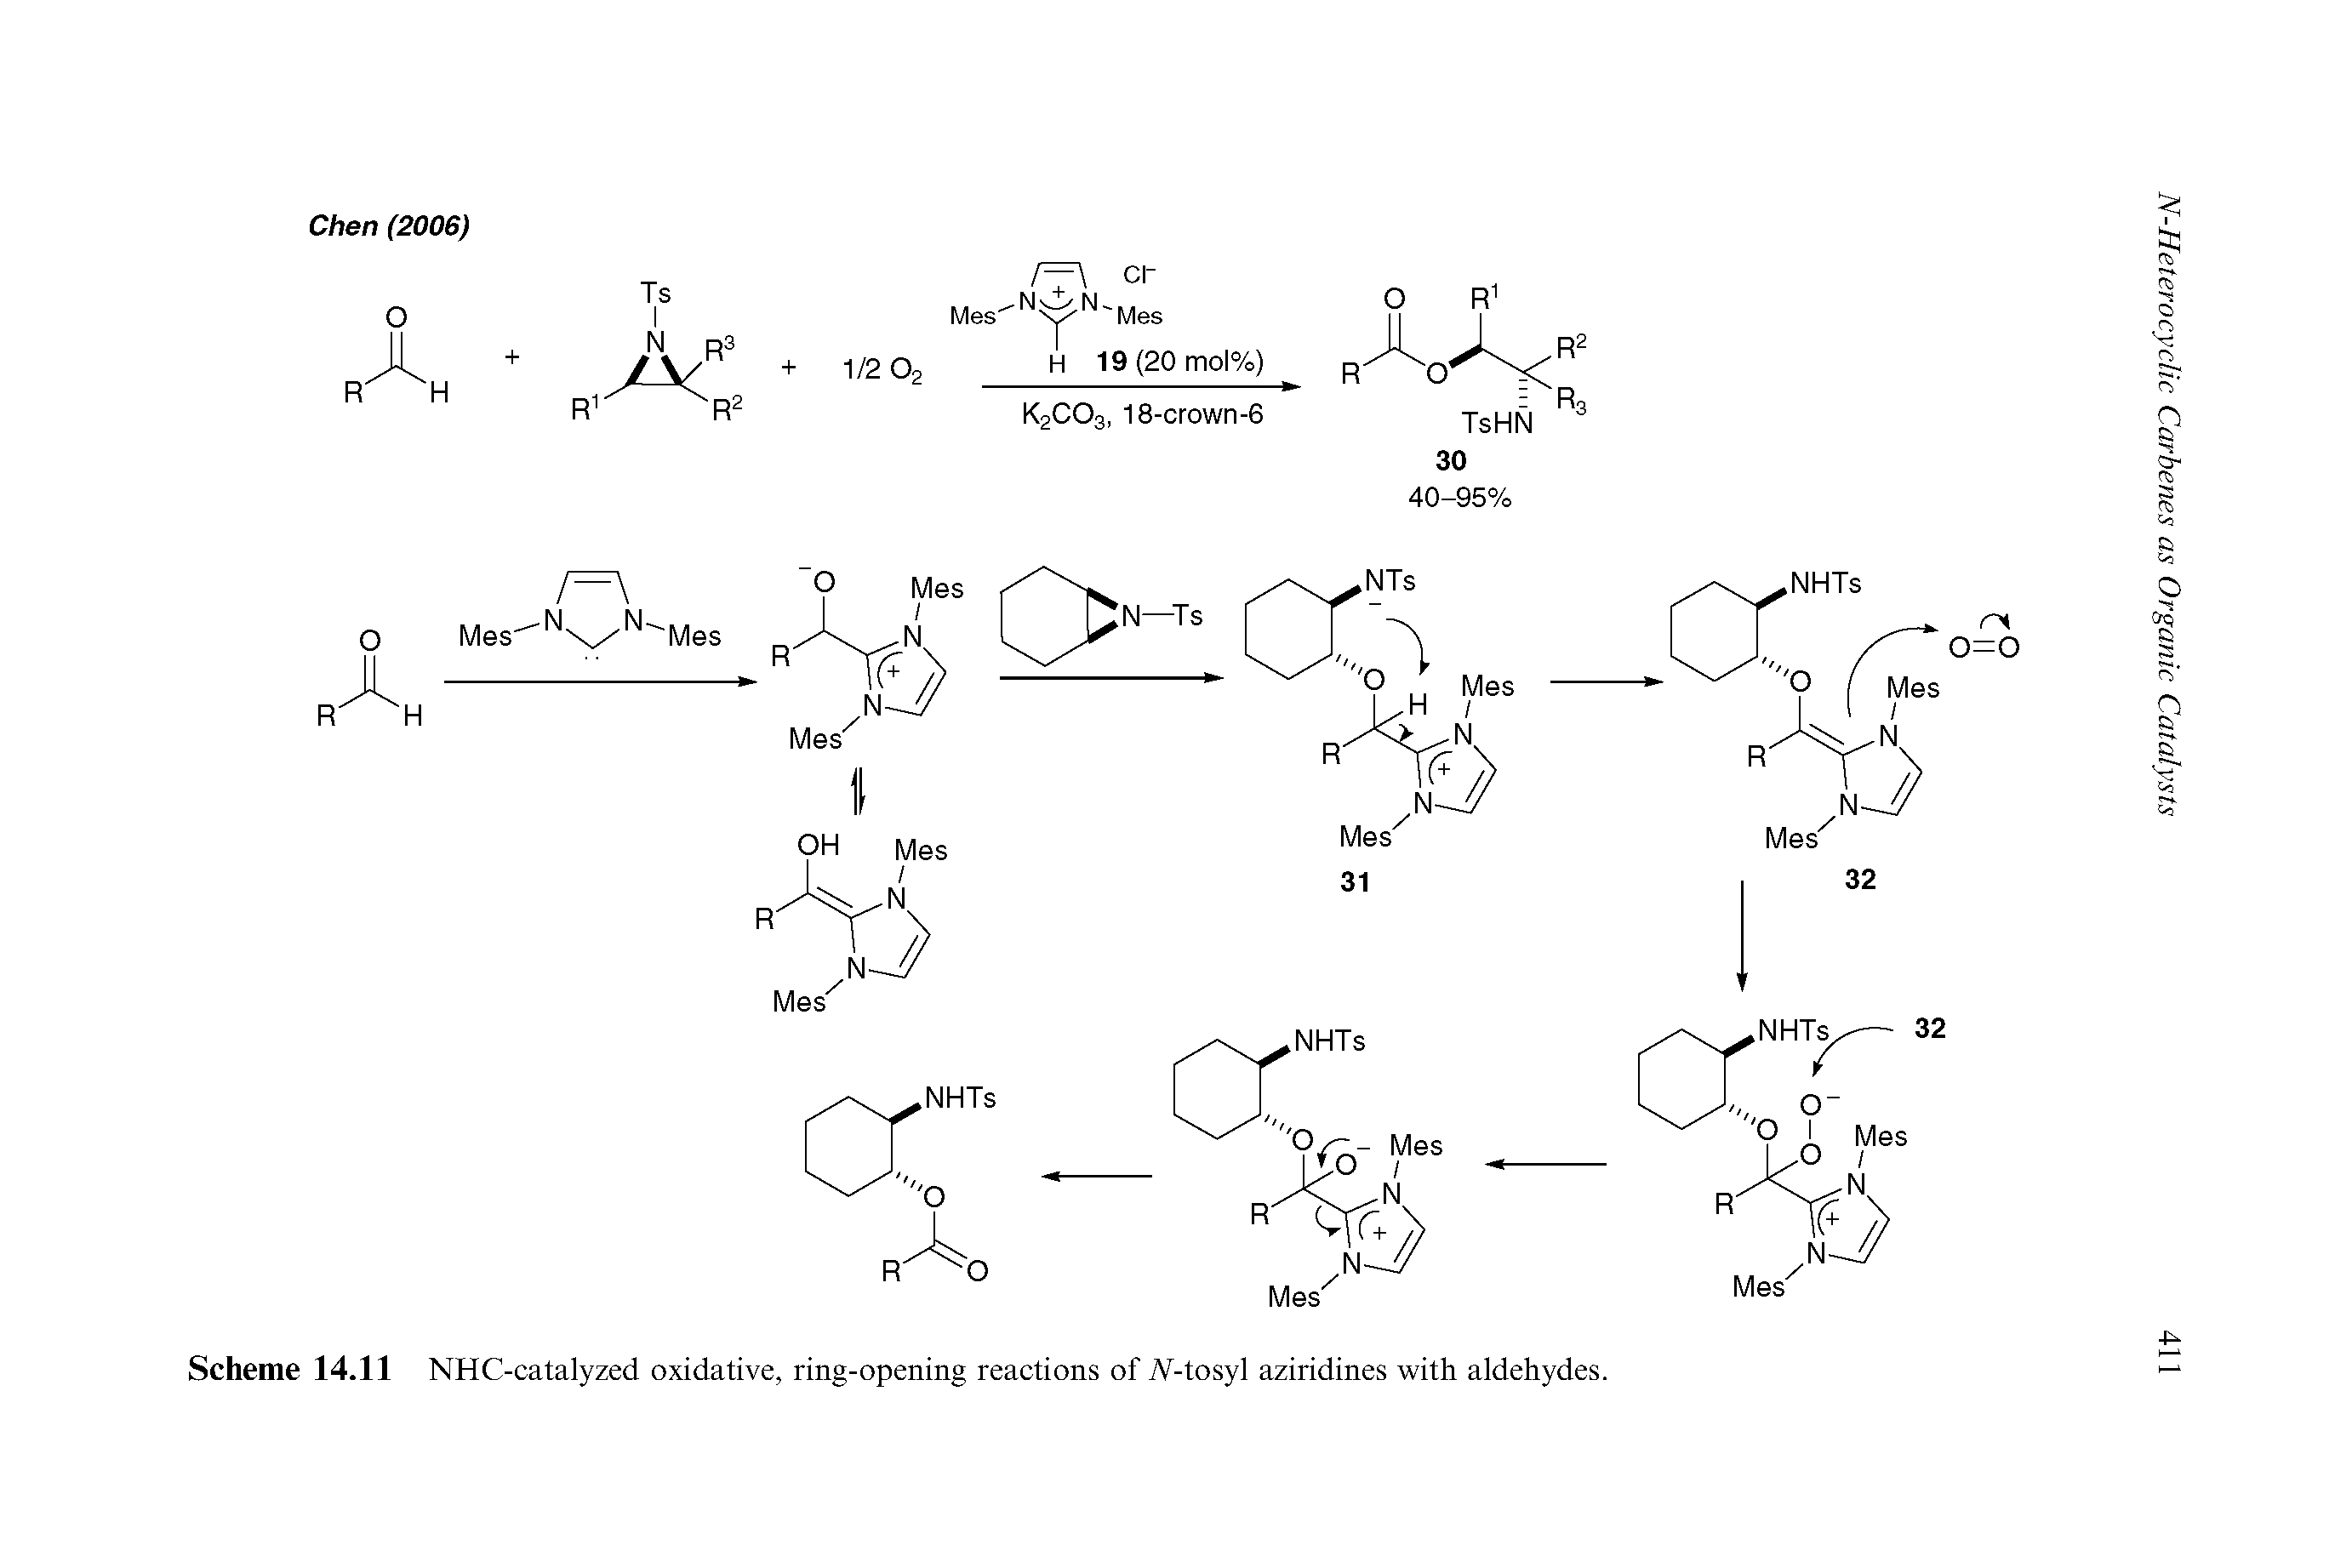 Scheme 14.11 NHC-catalyzed oxidative, ring-opening reactions of A -tosyl aziridines with aldehydes.